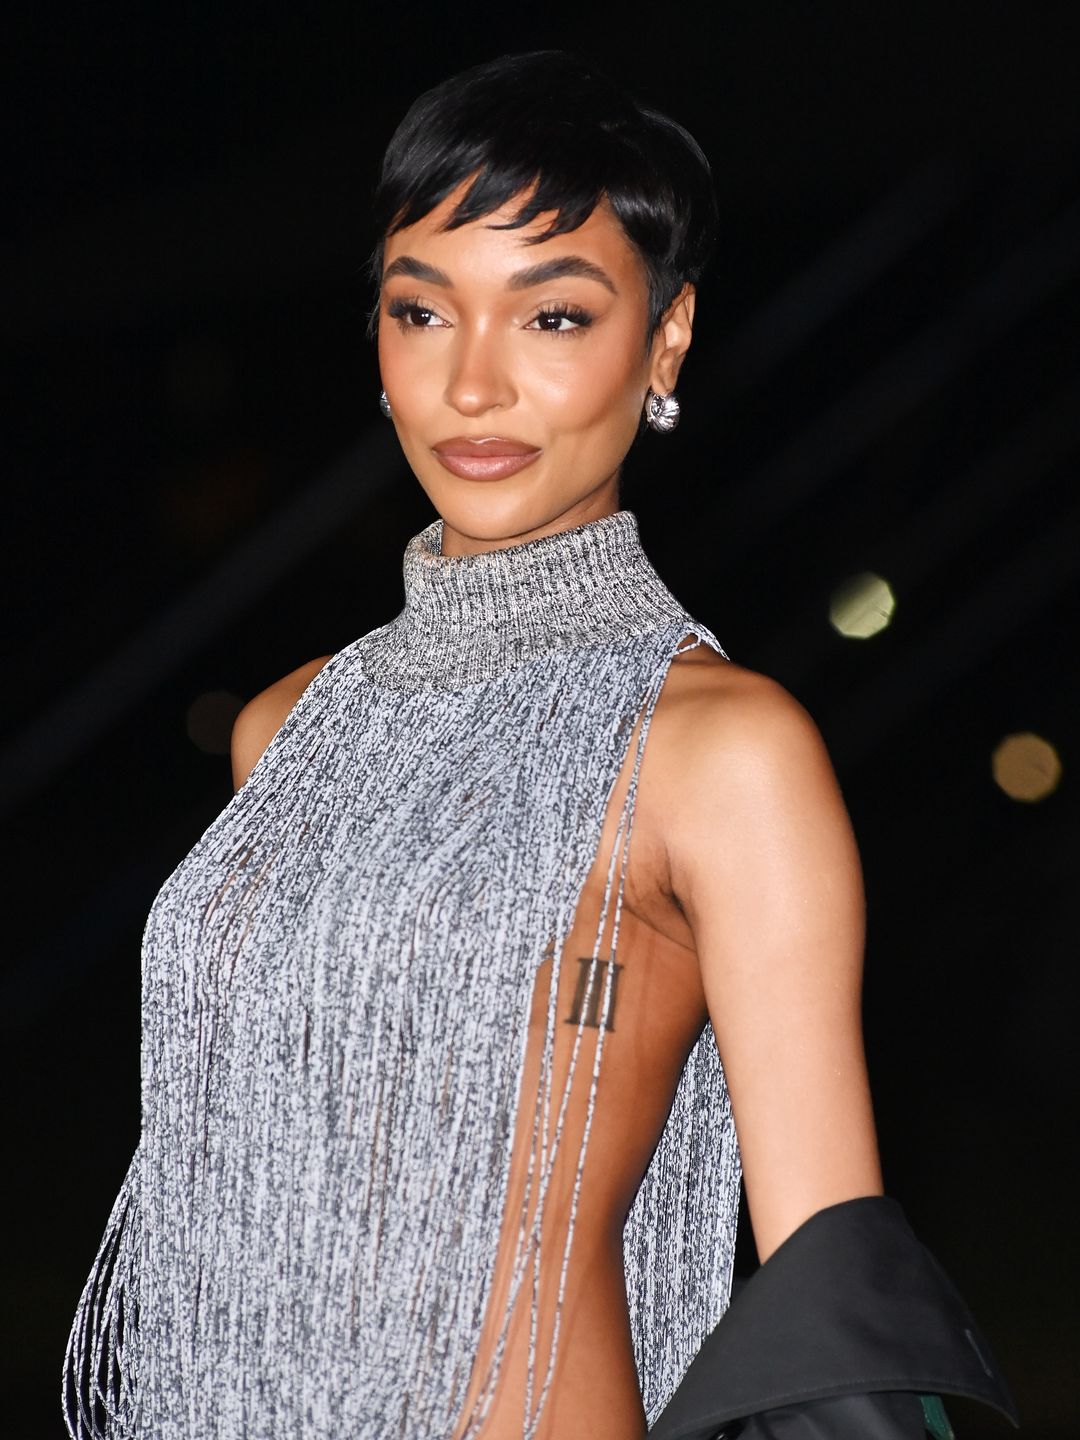 British model Jourdan Dunn stunned at the Burberry show wearing a grey turtleneck vest with open sides.